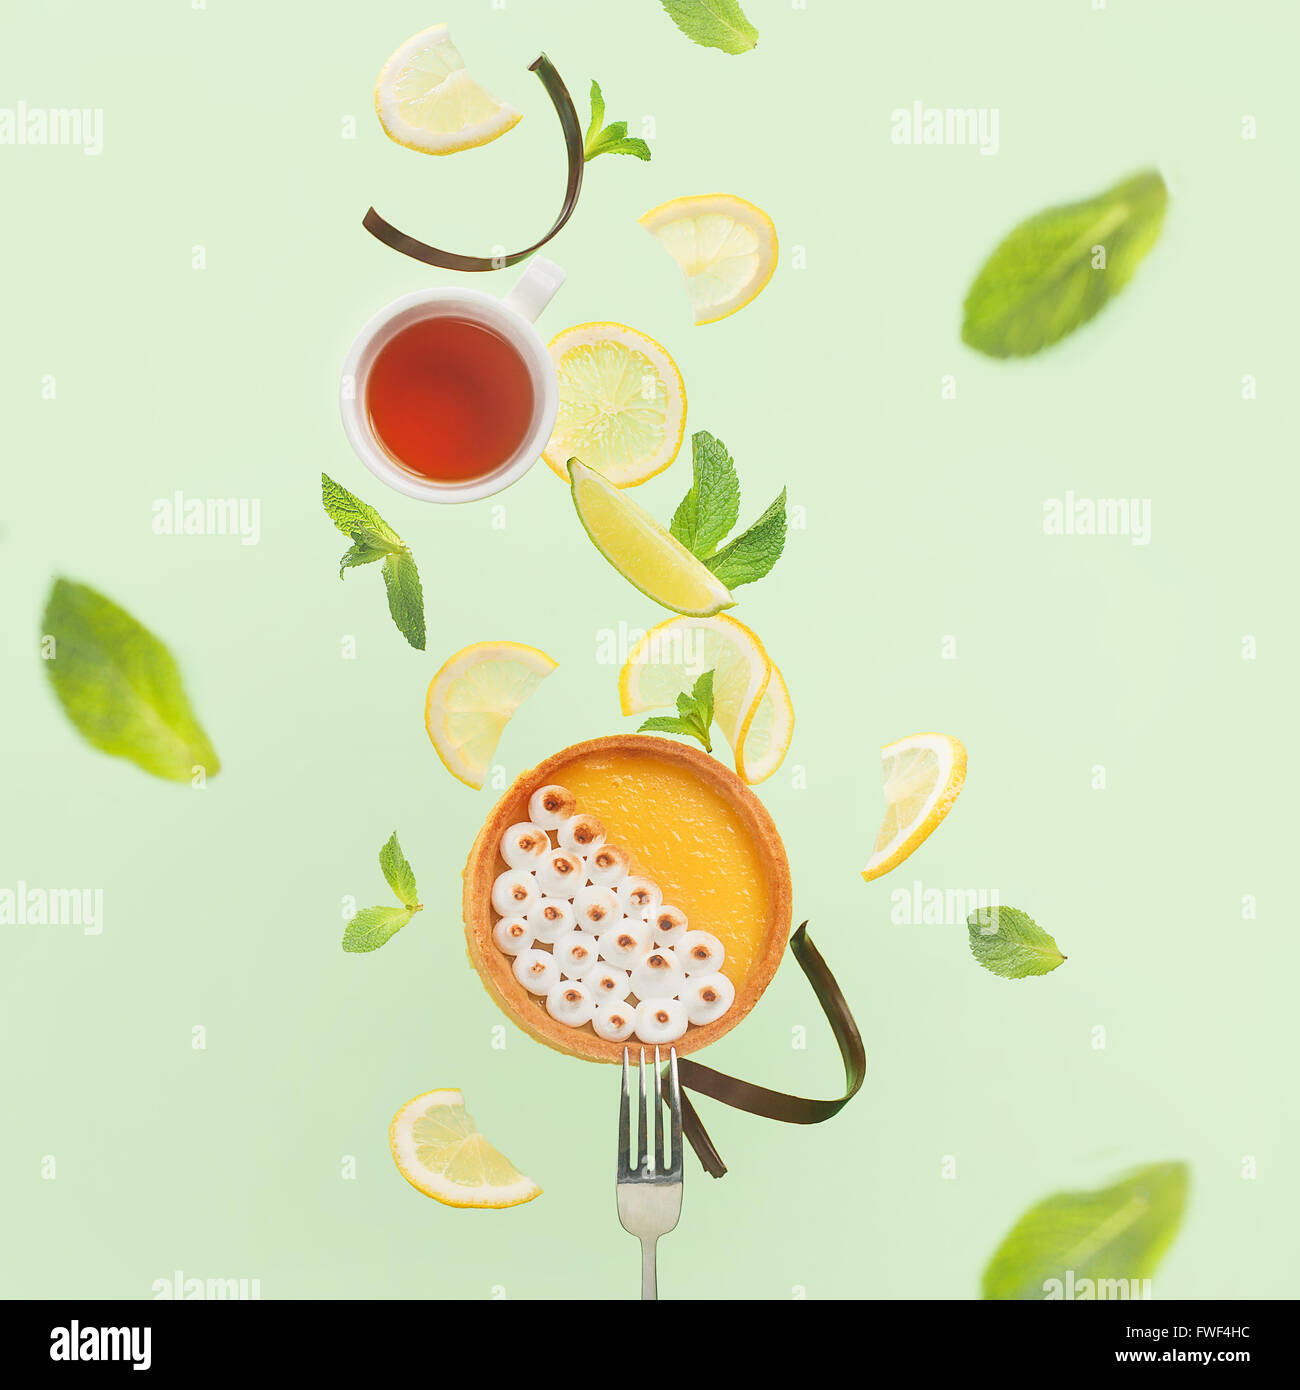 Lemon tart with cup of tea, lemon slices and mint leaves, balancing on a fork Stock Photo